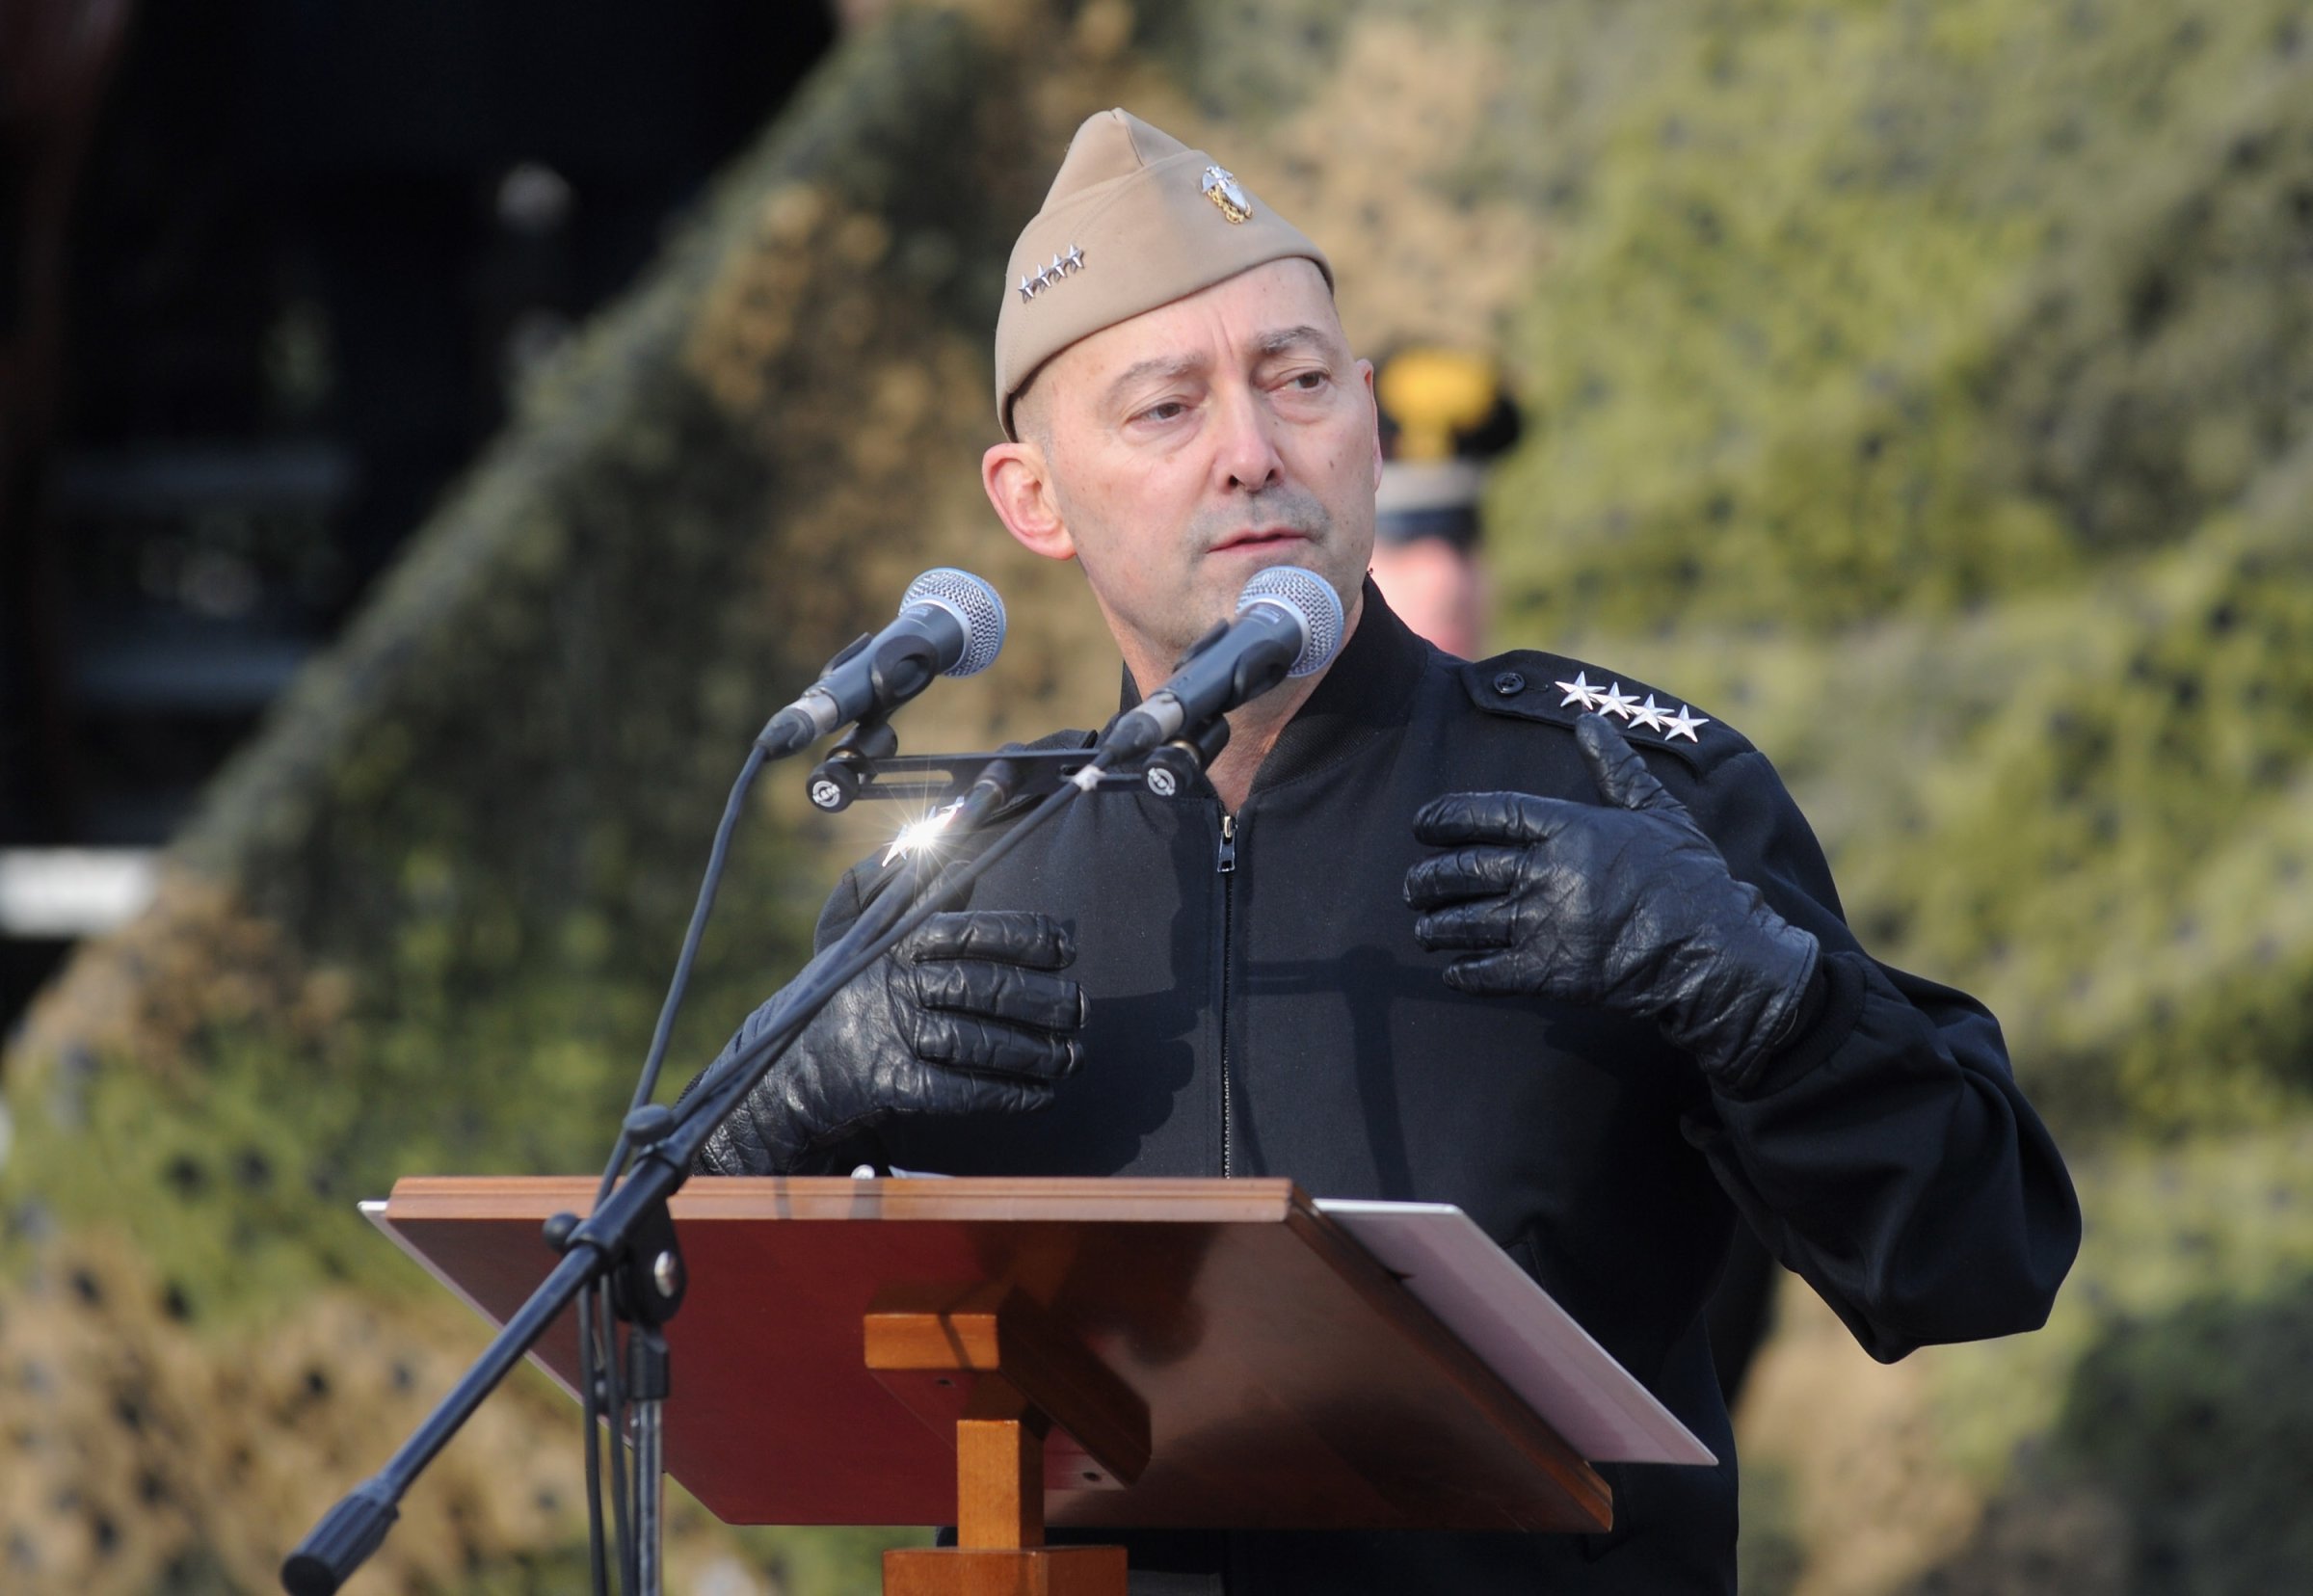 Former Supreme Allied Commander Europe Admiral James Stavridis makes a speech at the departure Ceremony for OTAN Rapid Deployable Corps - Italy bound for Afghanistan at Ugo Mara Barracks in Solbiate Olona, Italy, on Jan. 10, 2013.